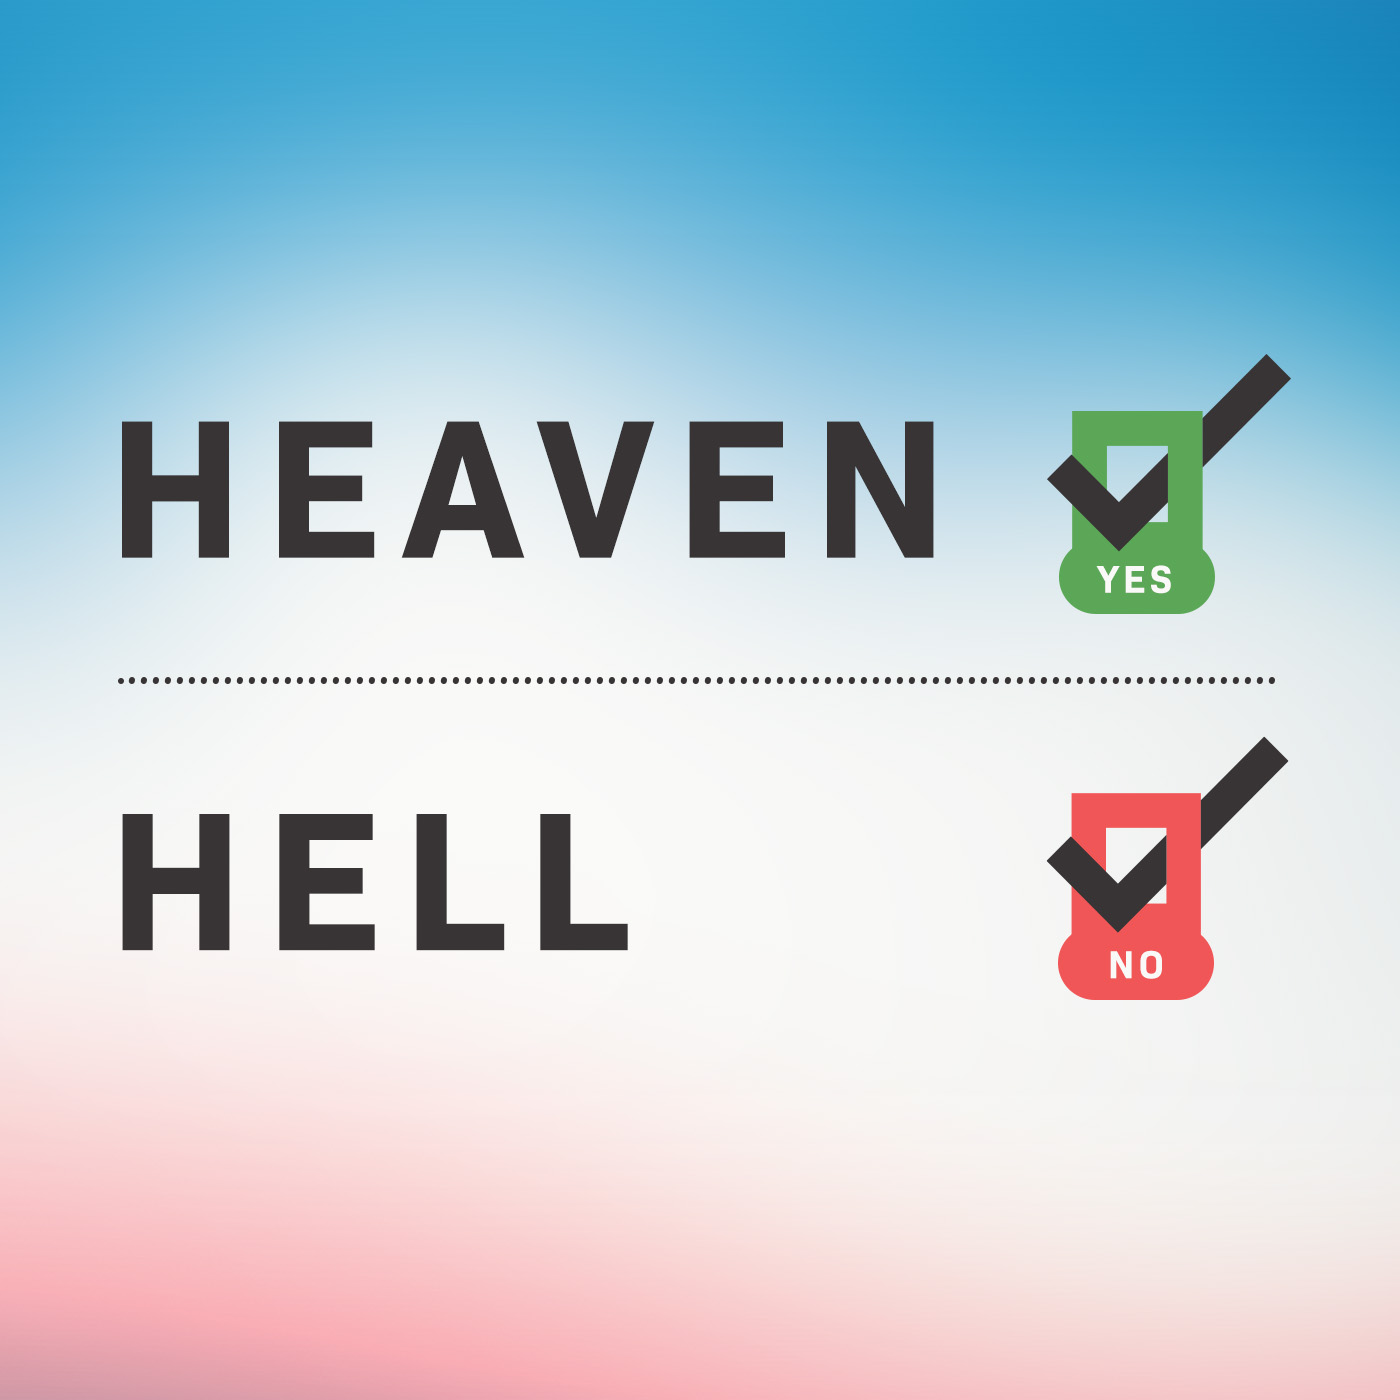 Heaven: Yes, Hell: No